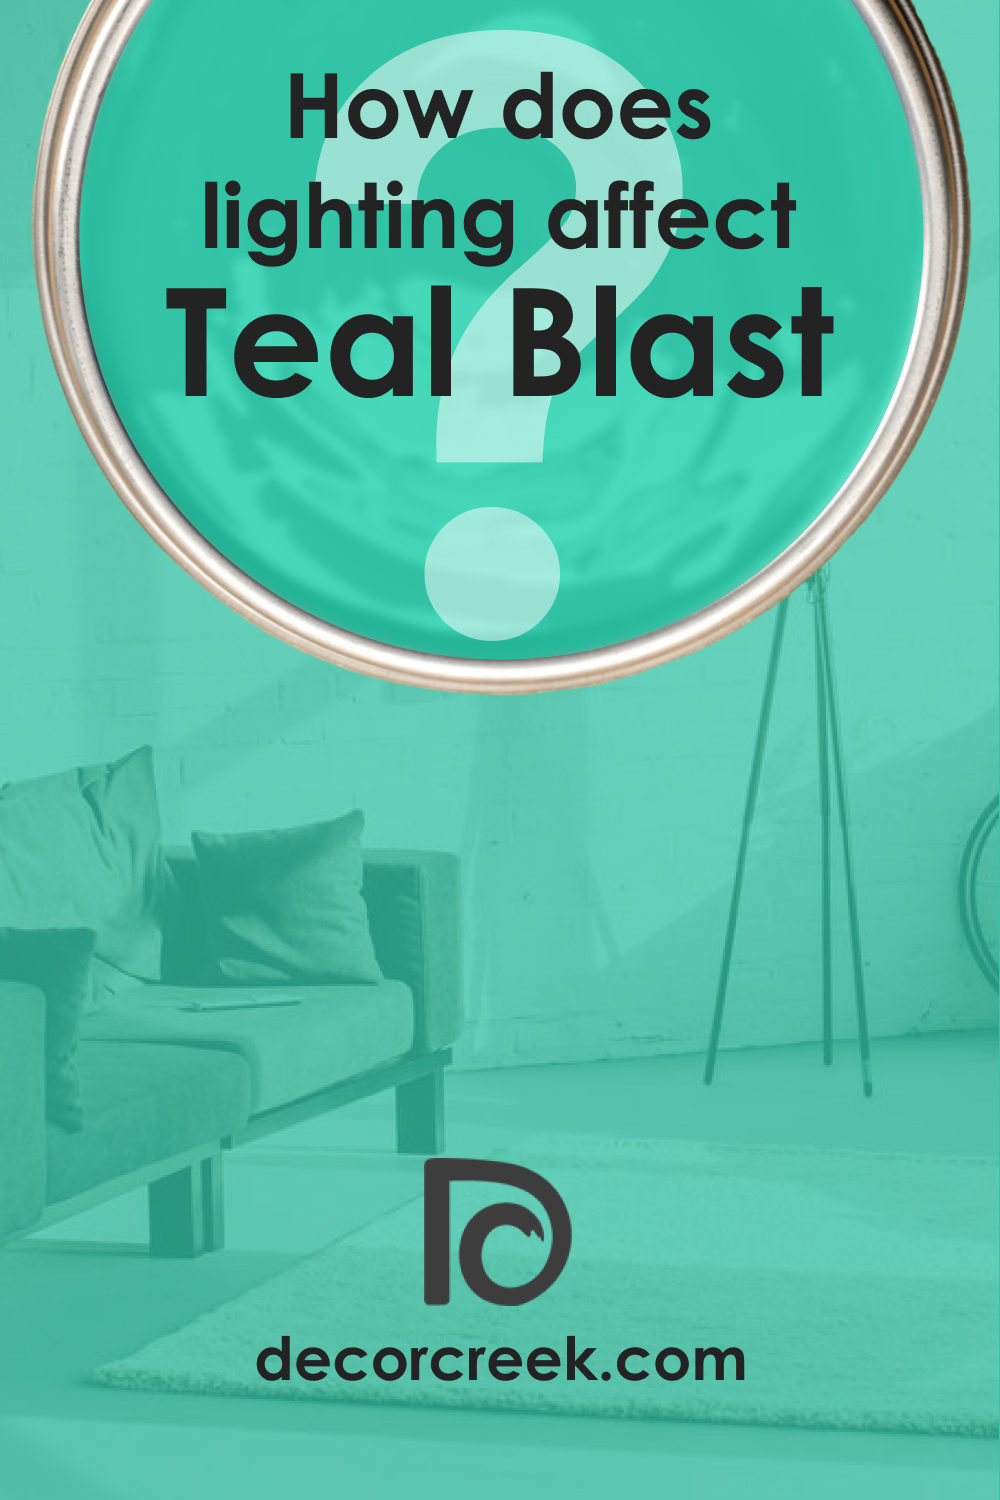 How Does Lighting Affect Teal Blast 2039-40?